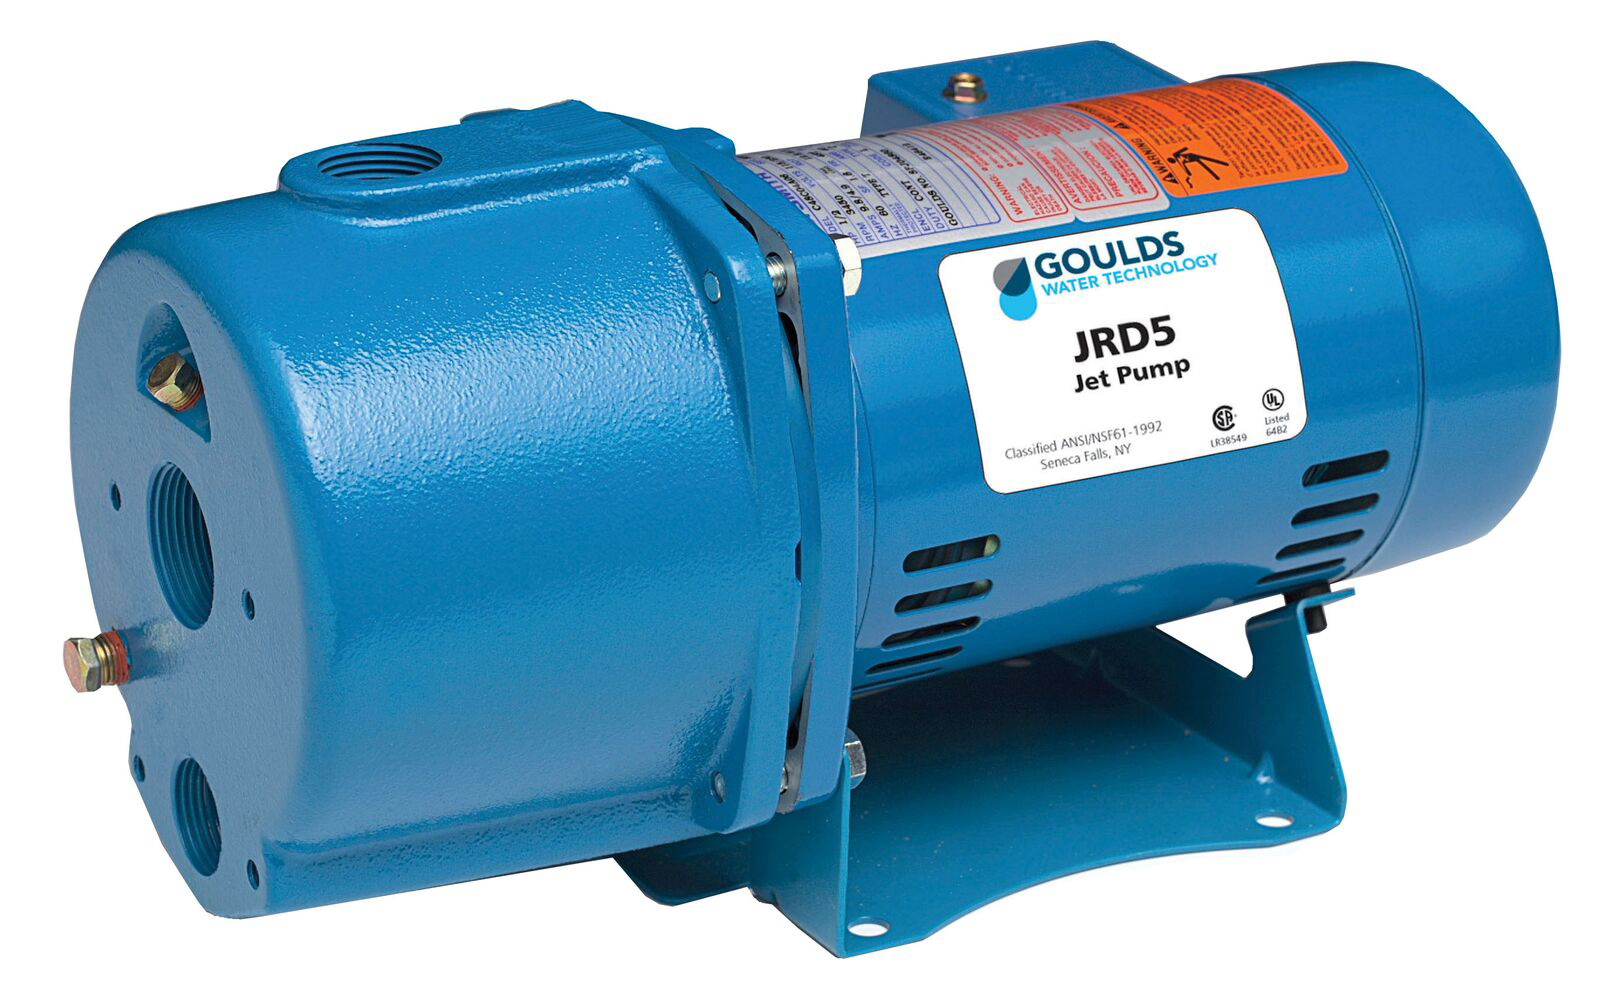 Goulds JRD5 1/2HP Convertible Water Well Jet Pump Single Phase